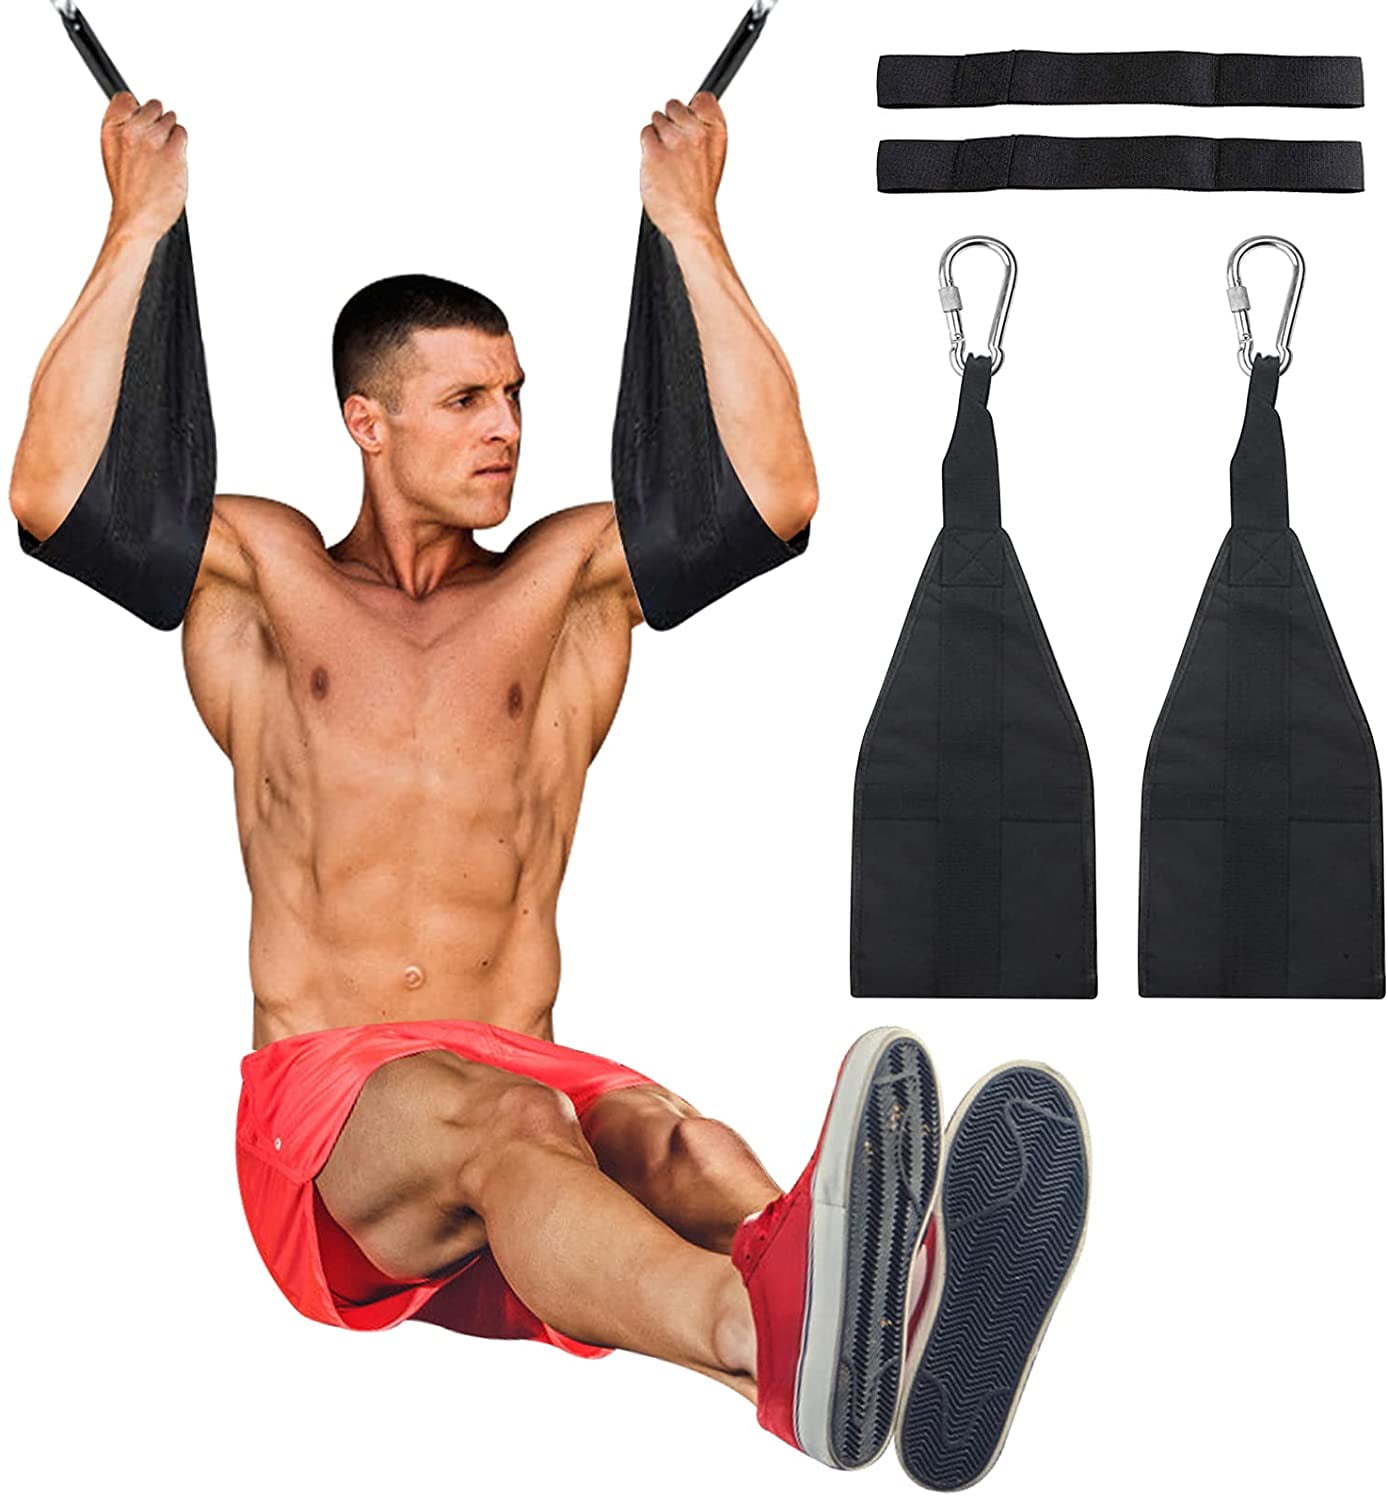 Ab Straps Hanging Abdominal Slings Chinup Exercise Pull Up Bar Gym Workout Abs 